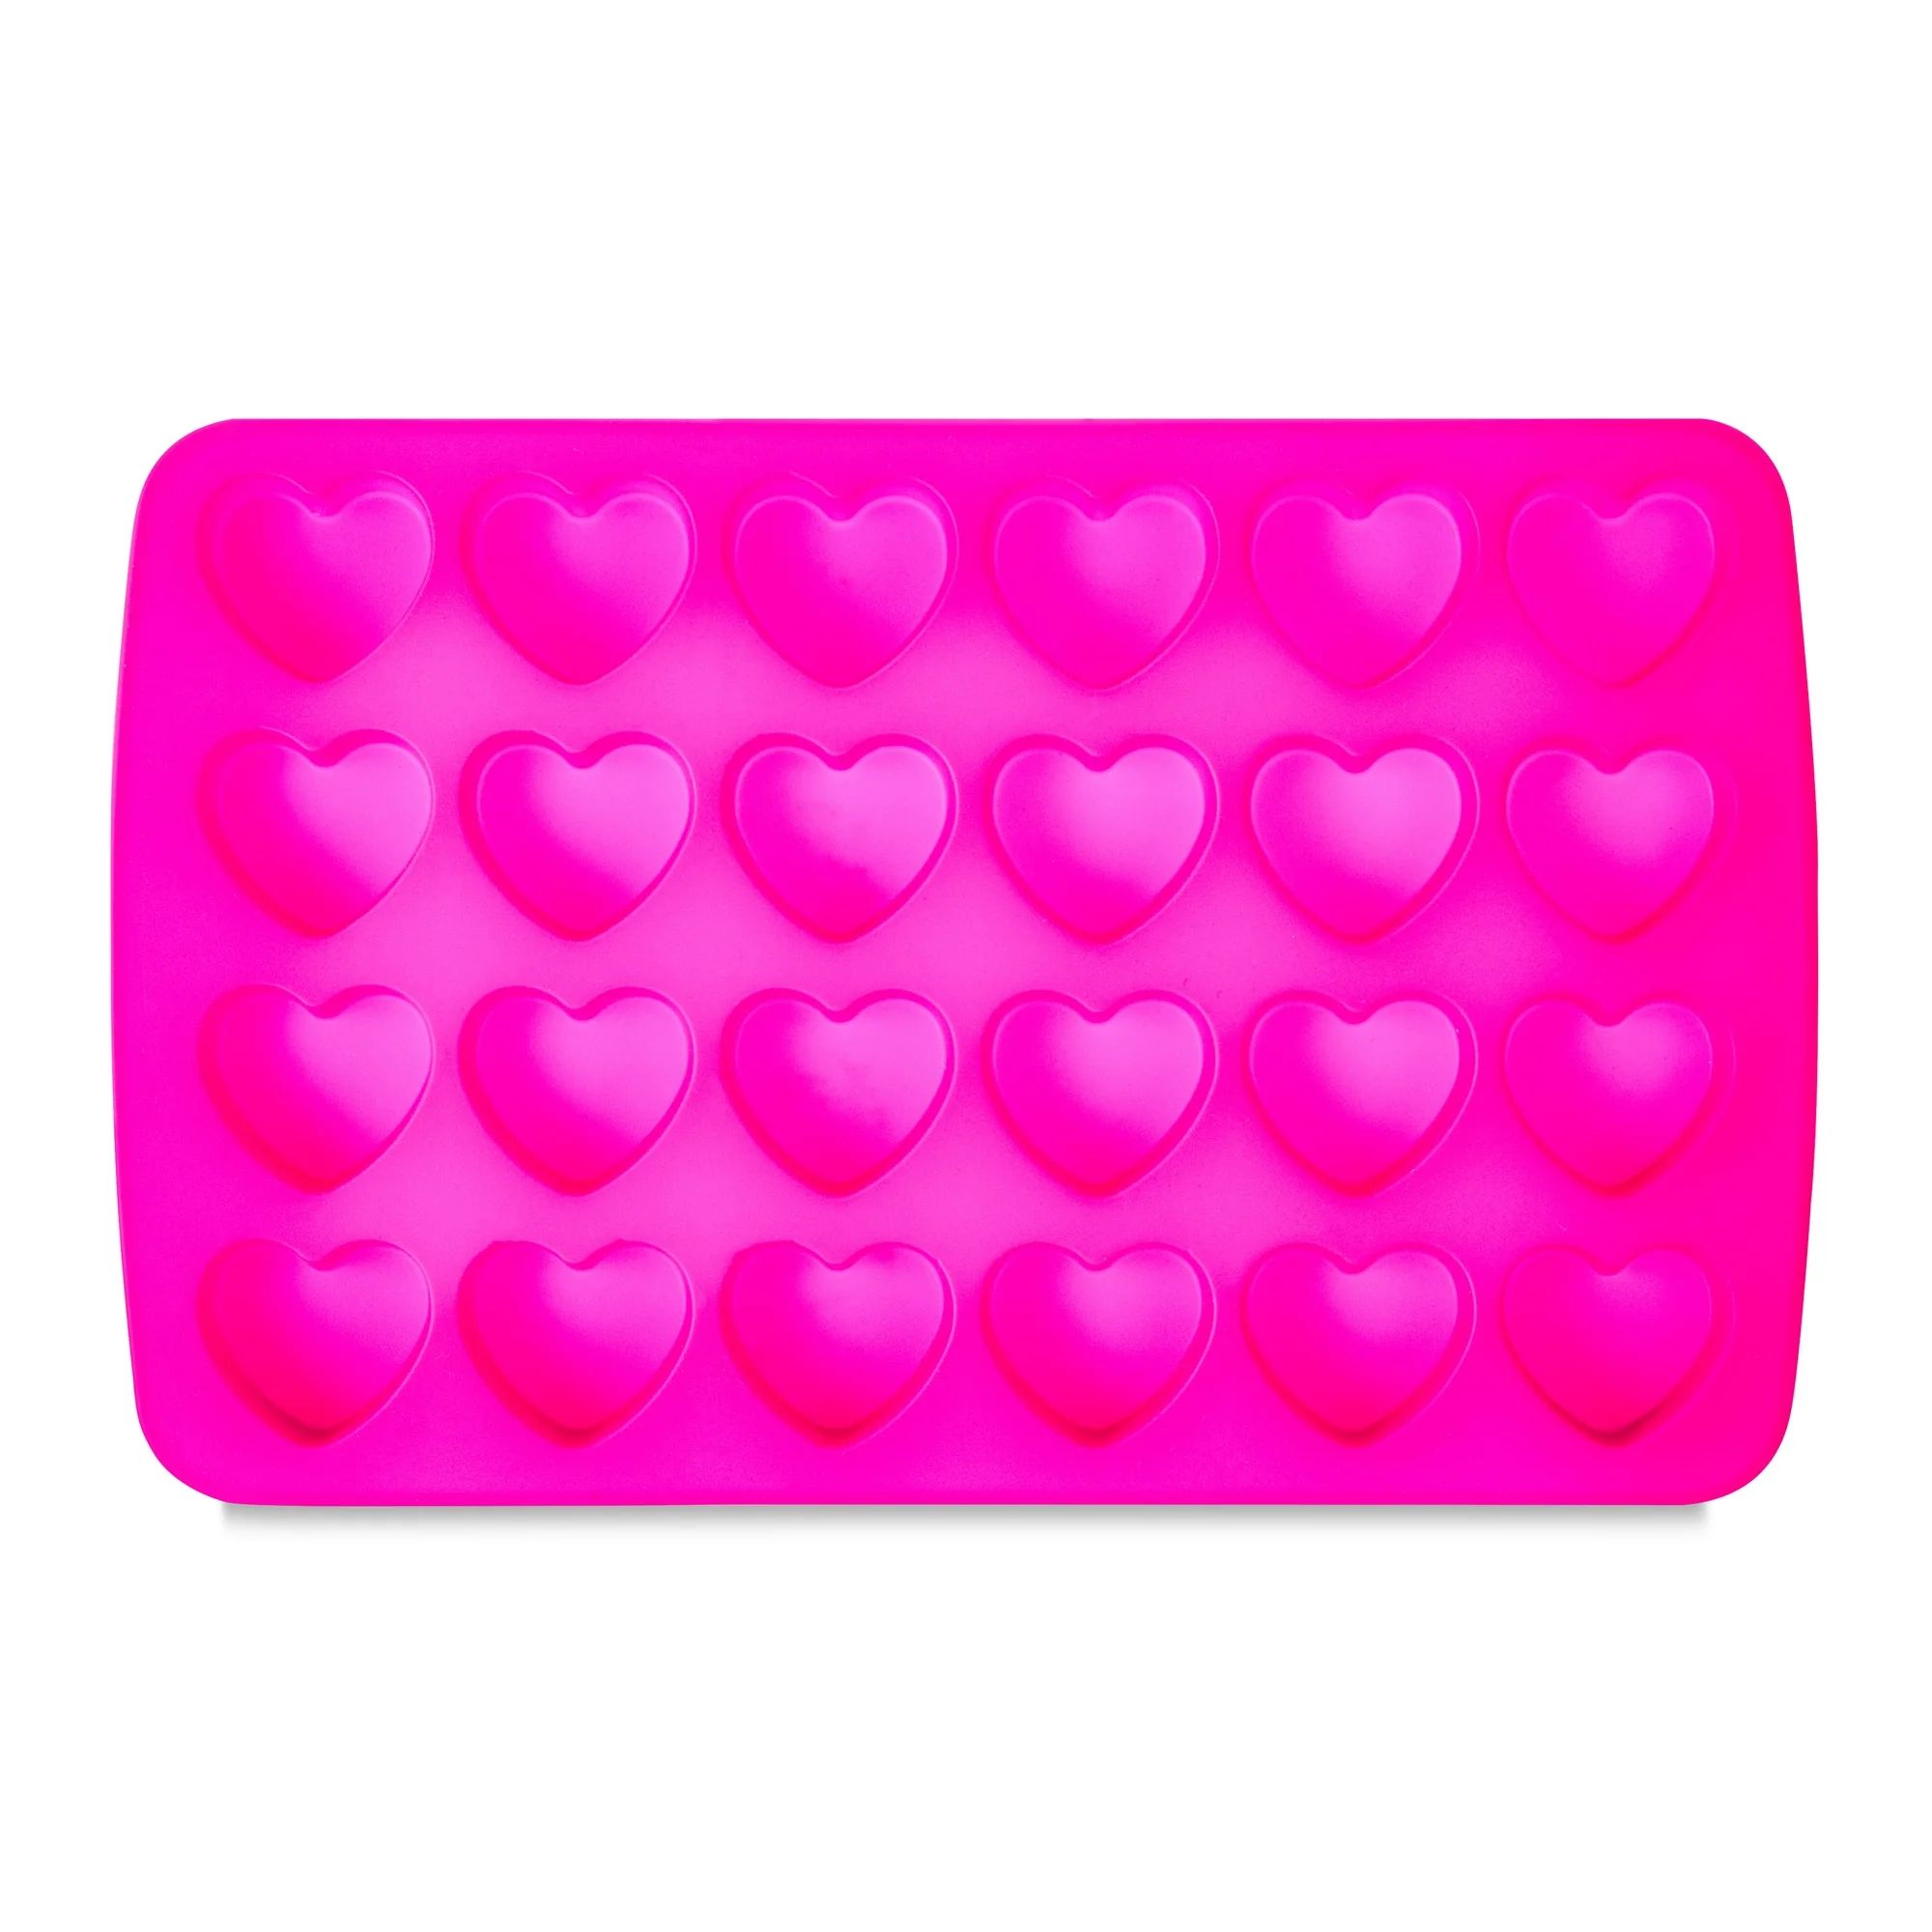 Valentine's Day Hot Pink Heart Silicone Pan Candy Mold, 9.2 x 4.4 inch, Way To Celebrate | Walmart (US)